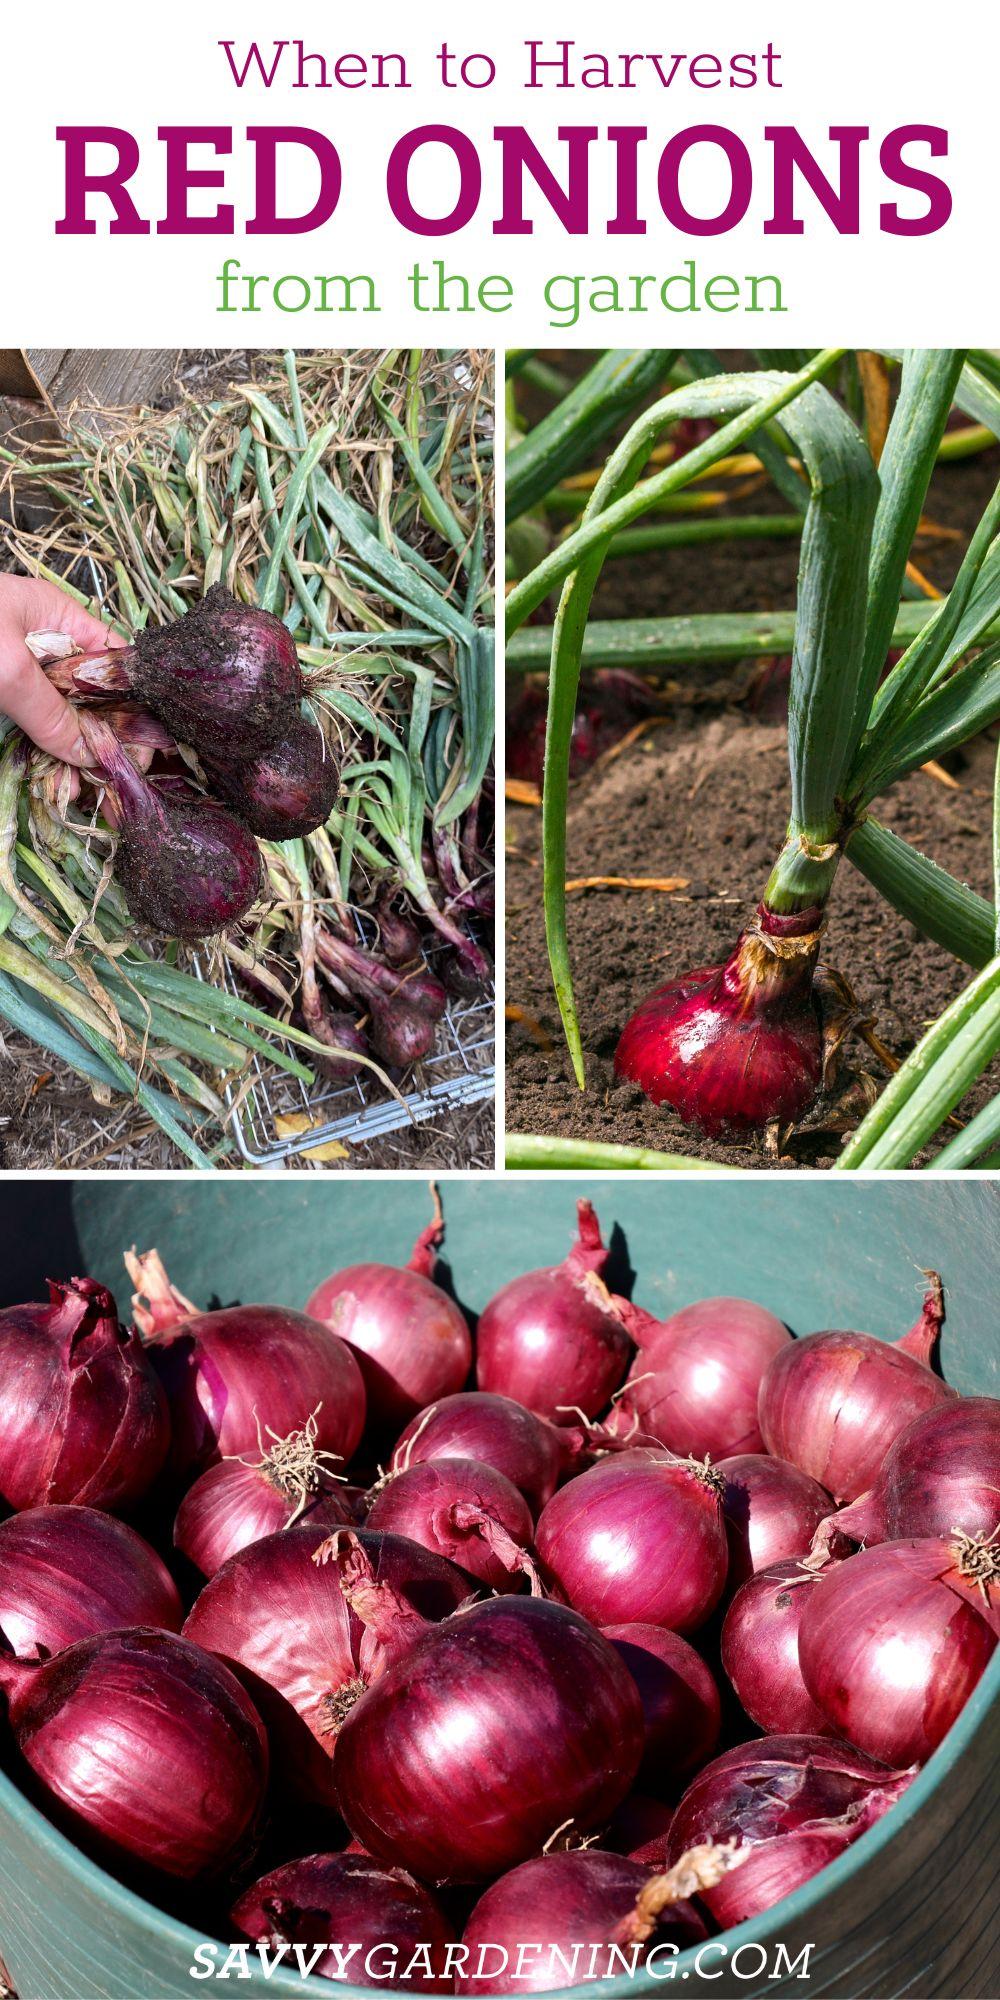 When to harvest red onions from the garden